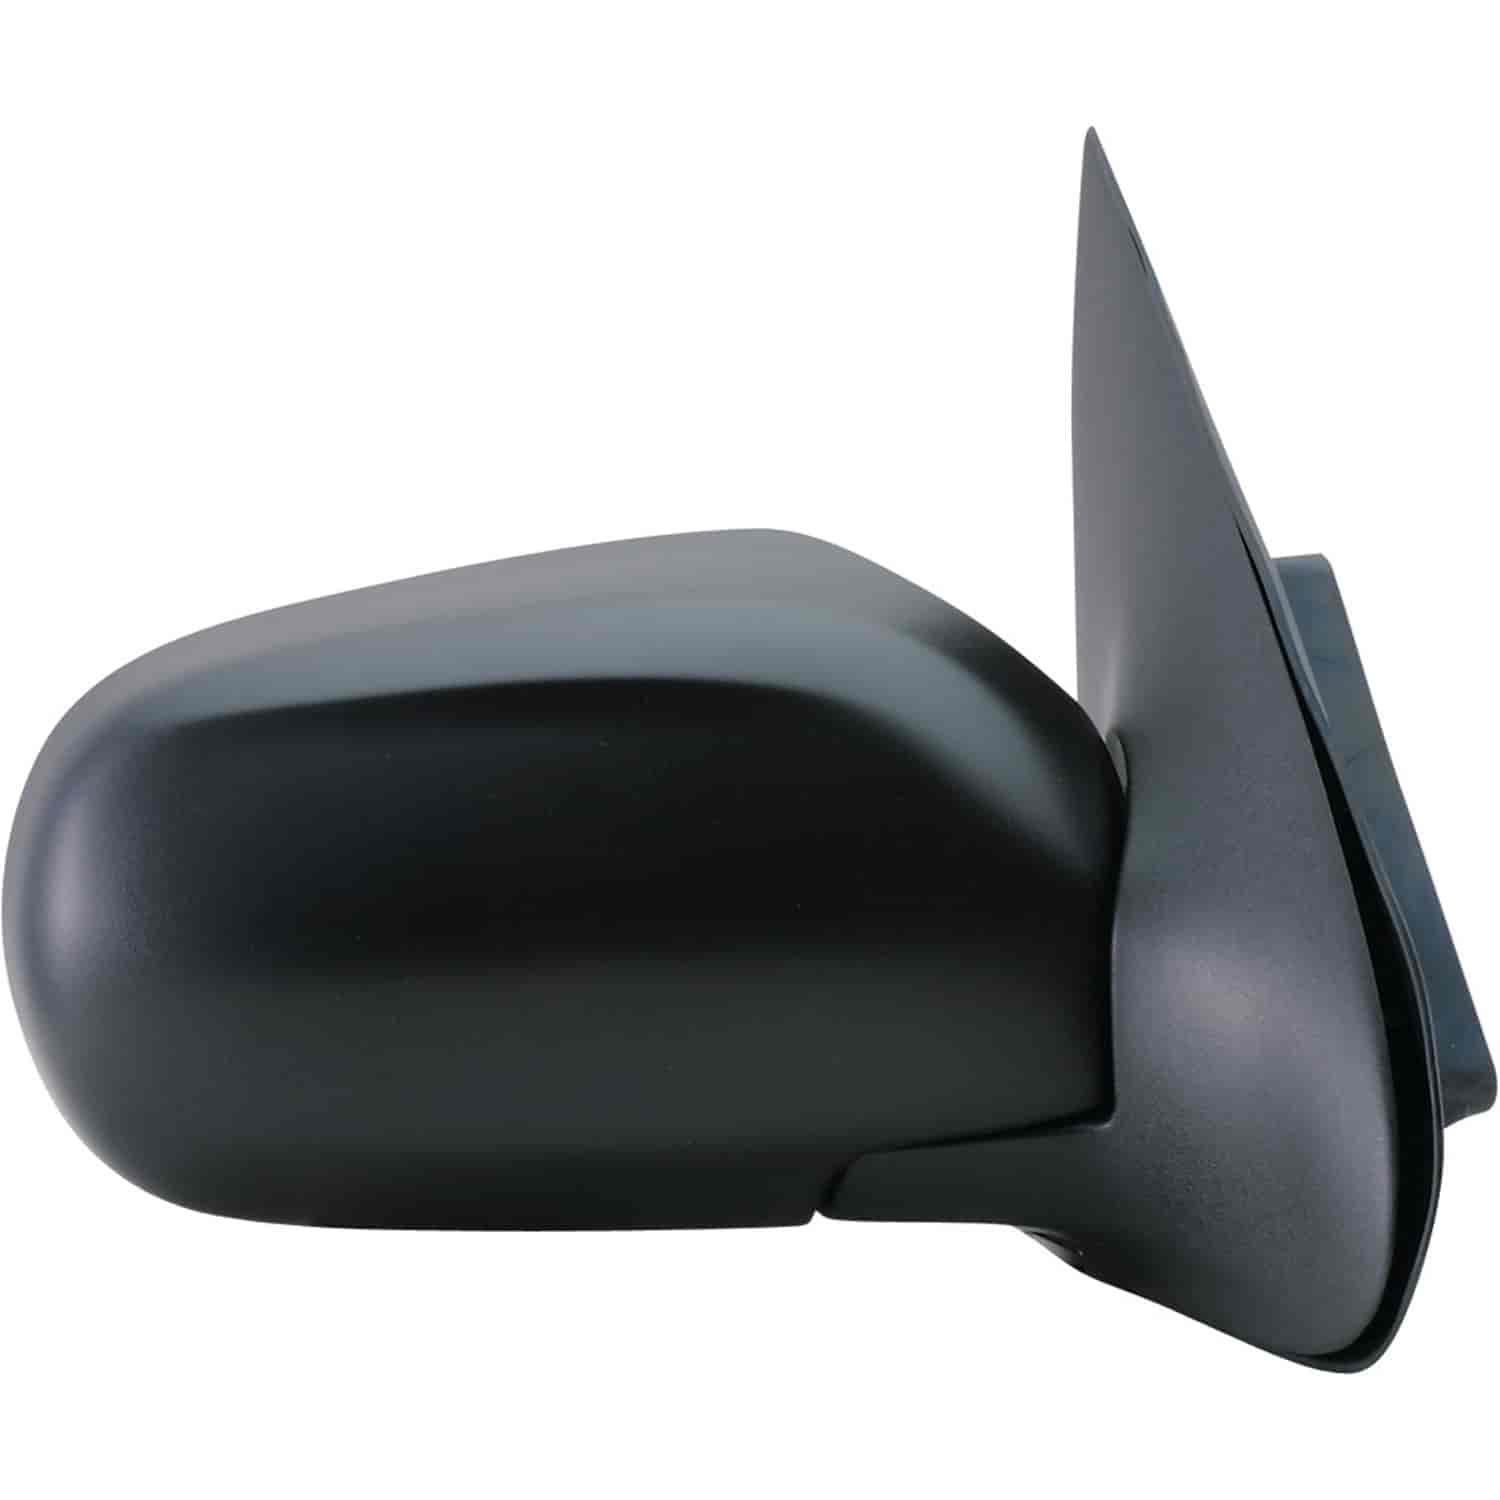 OEM Style Replacement mirror for 01-04 Mazda Tribute passenger side mirror tested to fit and functio